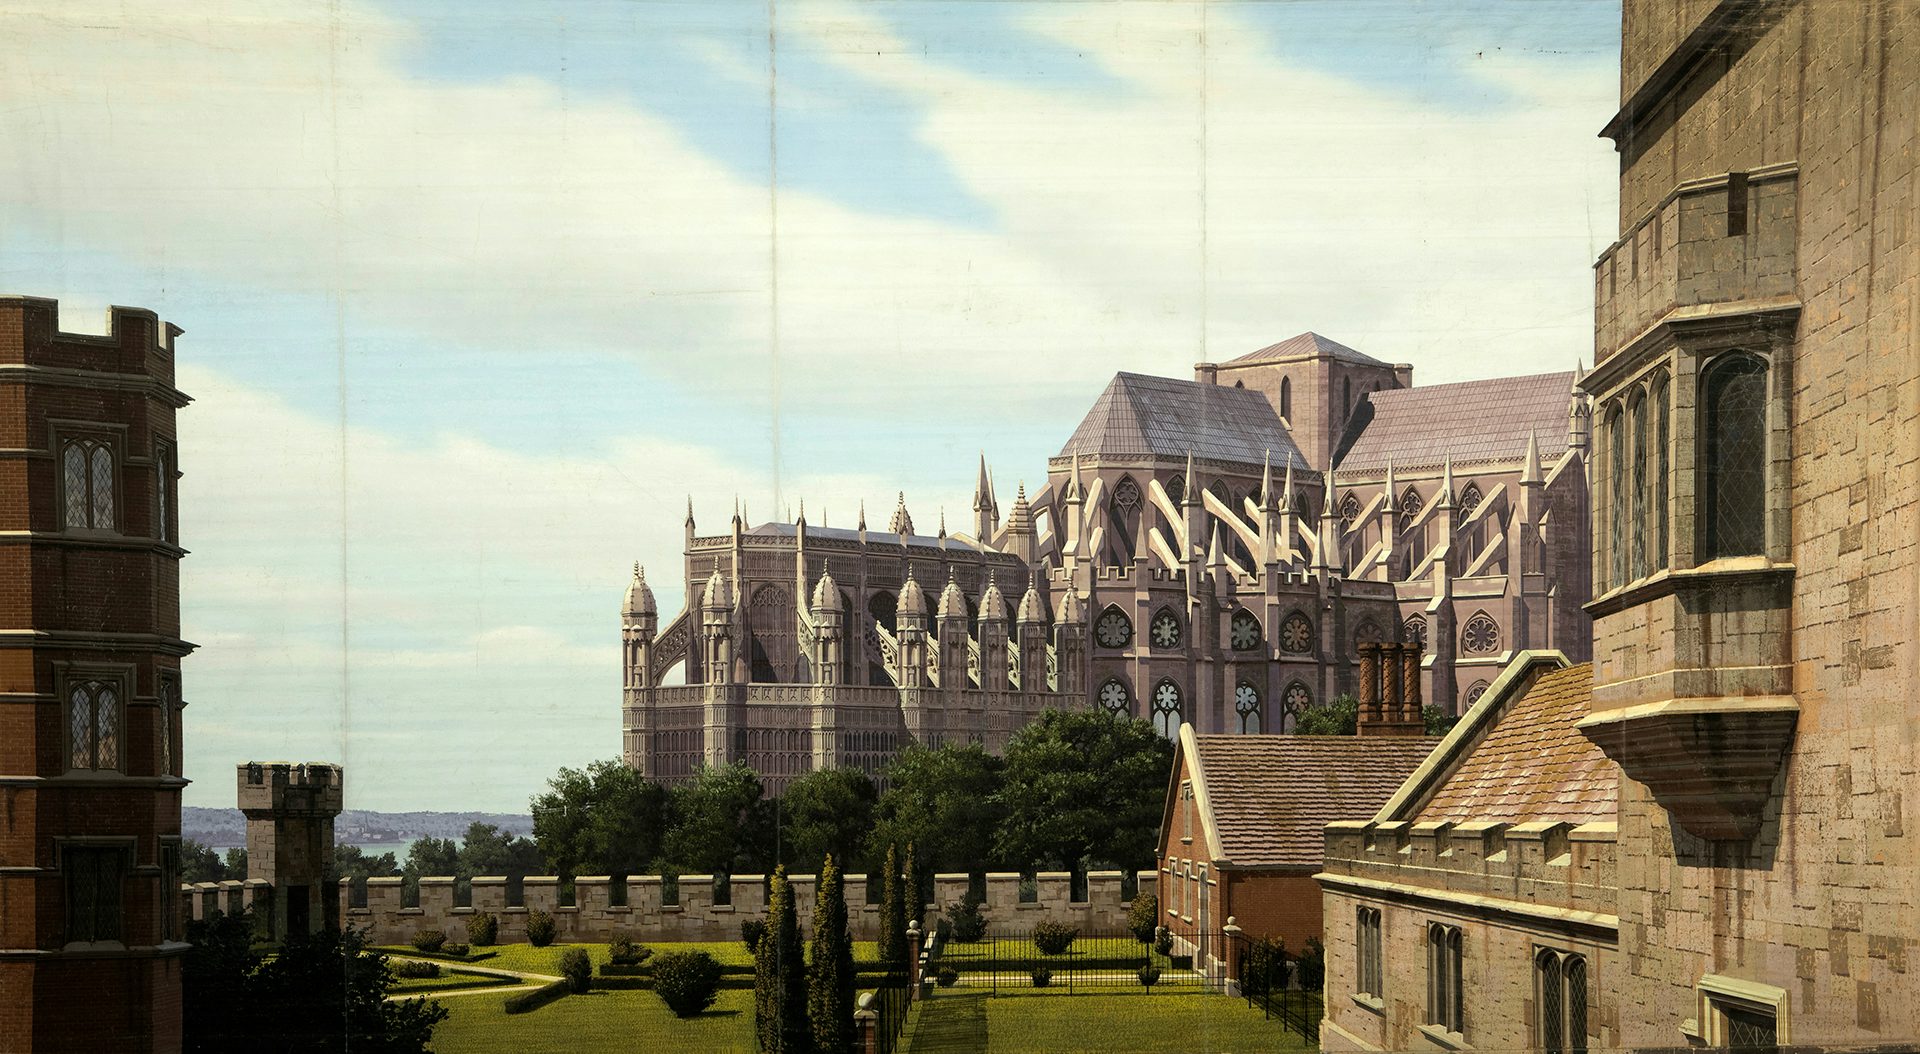 Photograph of a backdrop representing Wesmintser Abbey in the 1550s